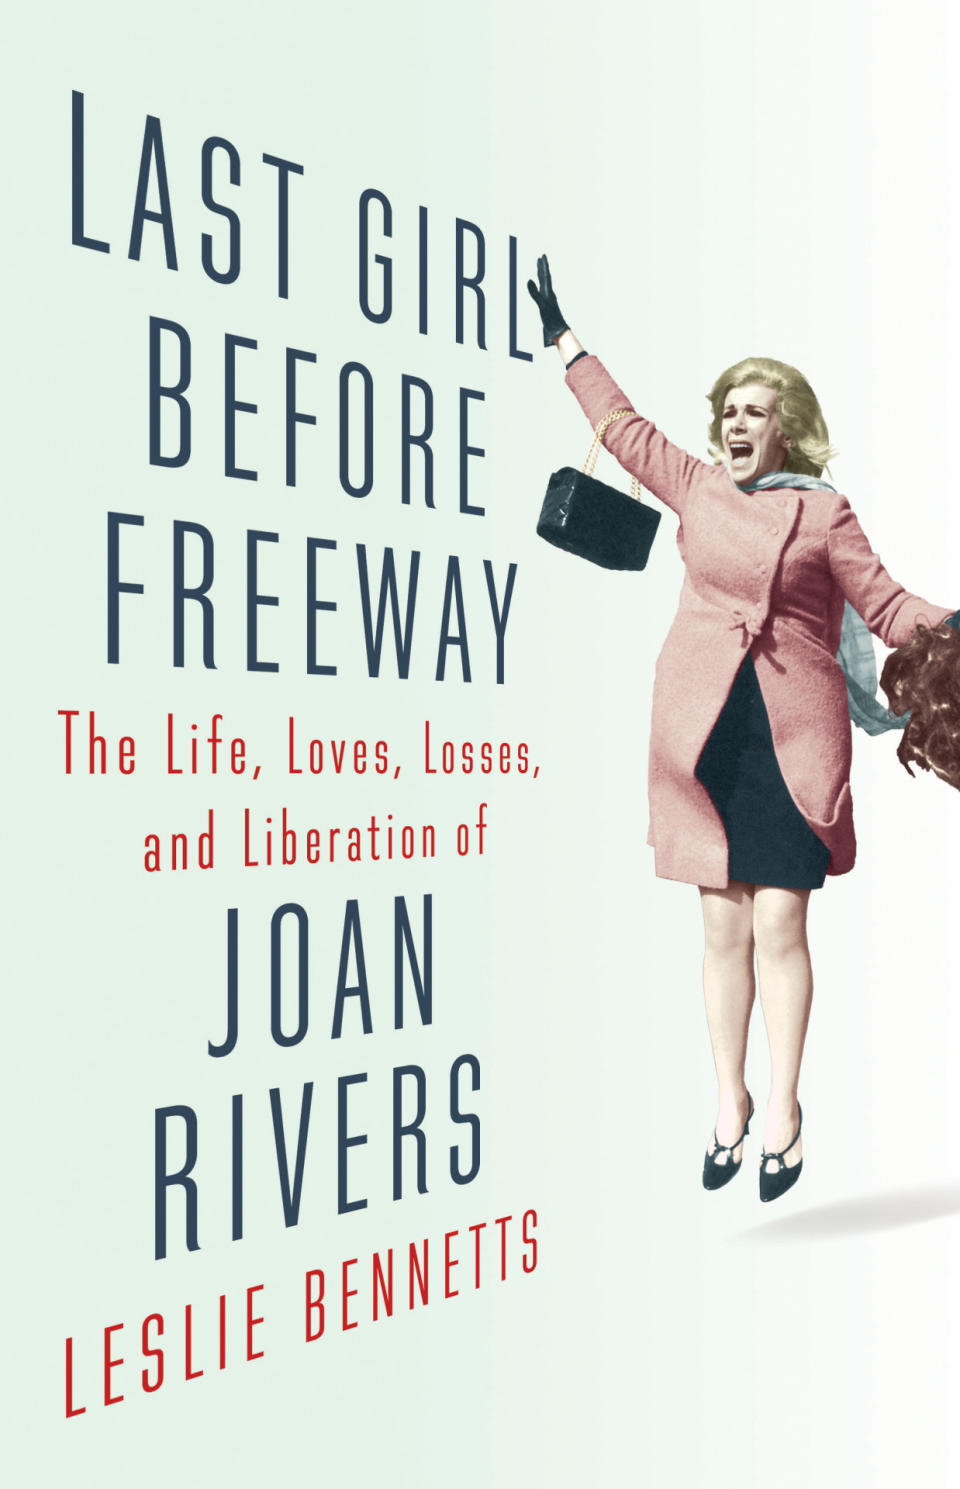 Last Girl Before Freeway: The Life, Loves, Losses, and Liberation of Joan Rivers, by Leslie Bennetts